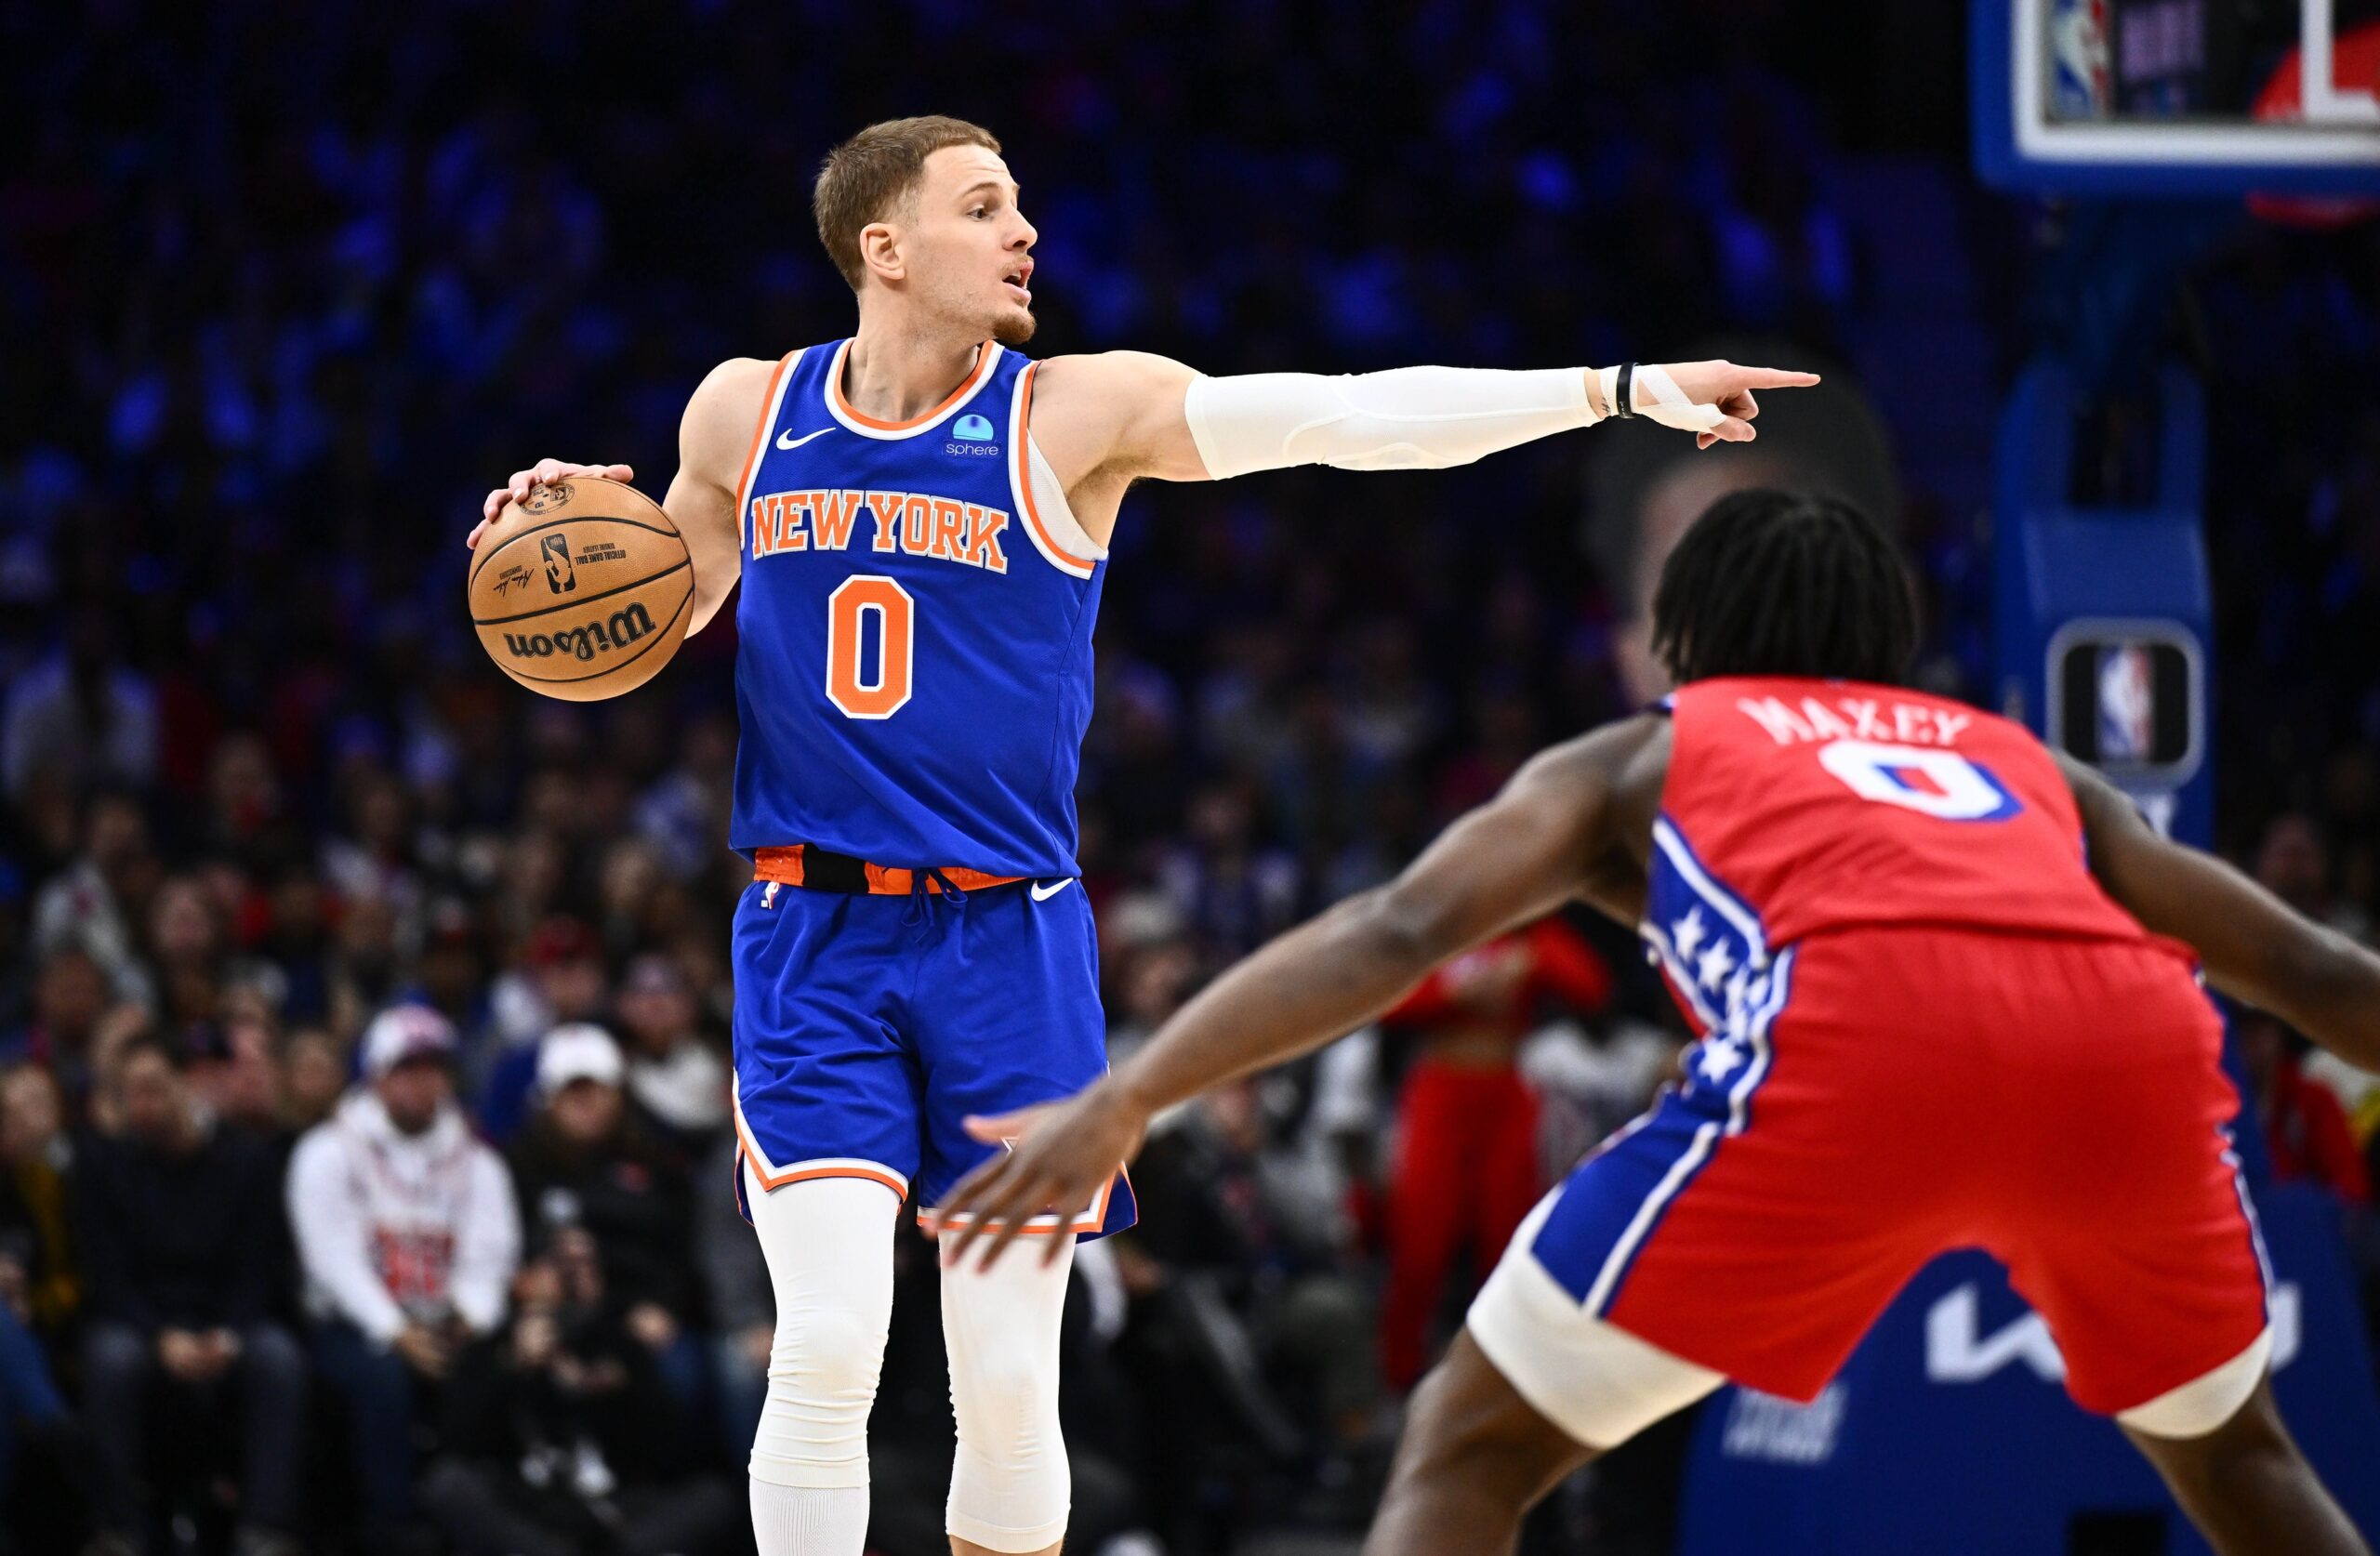 New York Knicks guard Donte DiVincenzo (0) gestures against the Philadelphia 76ers in the first quarter at Wells Fargo Center.